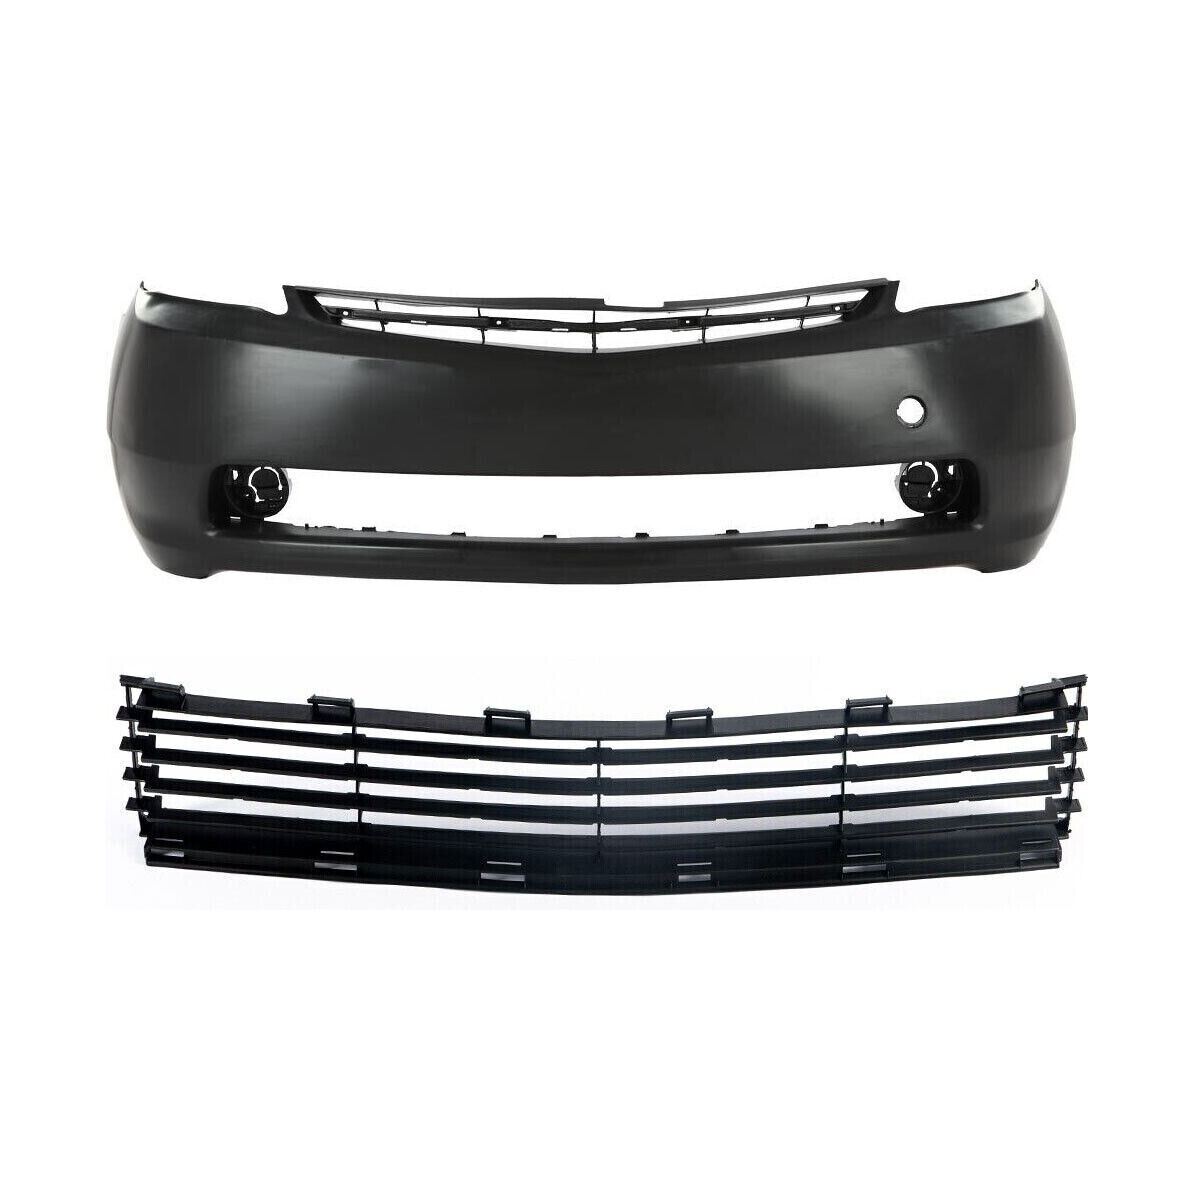 Front Bumper Cover+Grille Kit Fit For 2004 2005 2006 2007 2008 2009 Toyota Prius